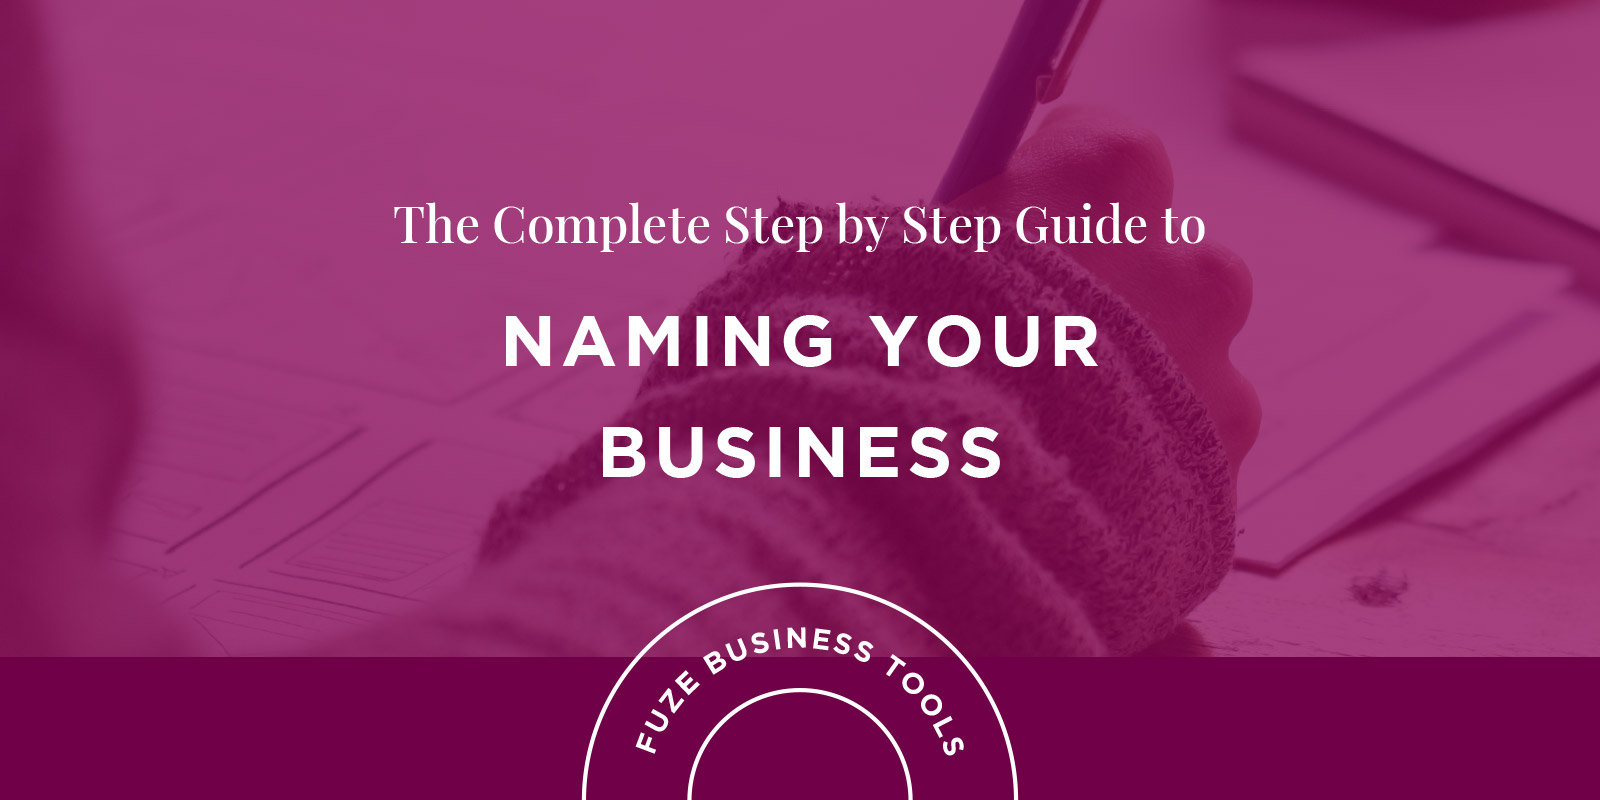 Title Image: Company Naming - The Complete Step by Step Guide to Naming Your Business (Part of Fuze Business Tools series)